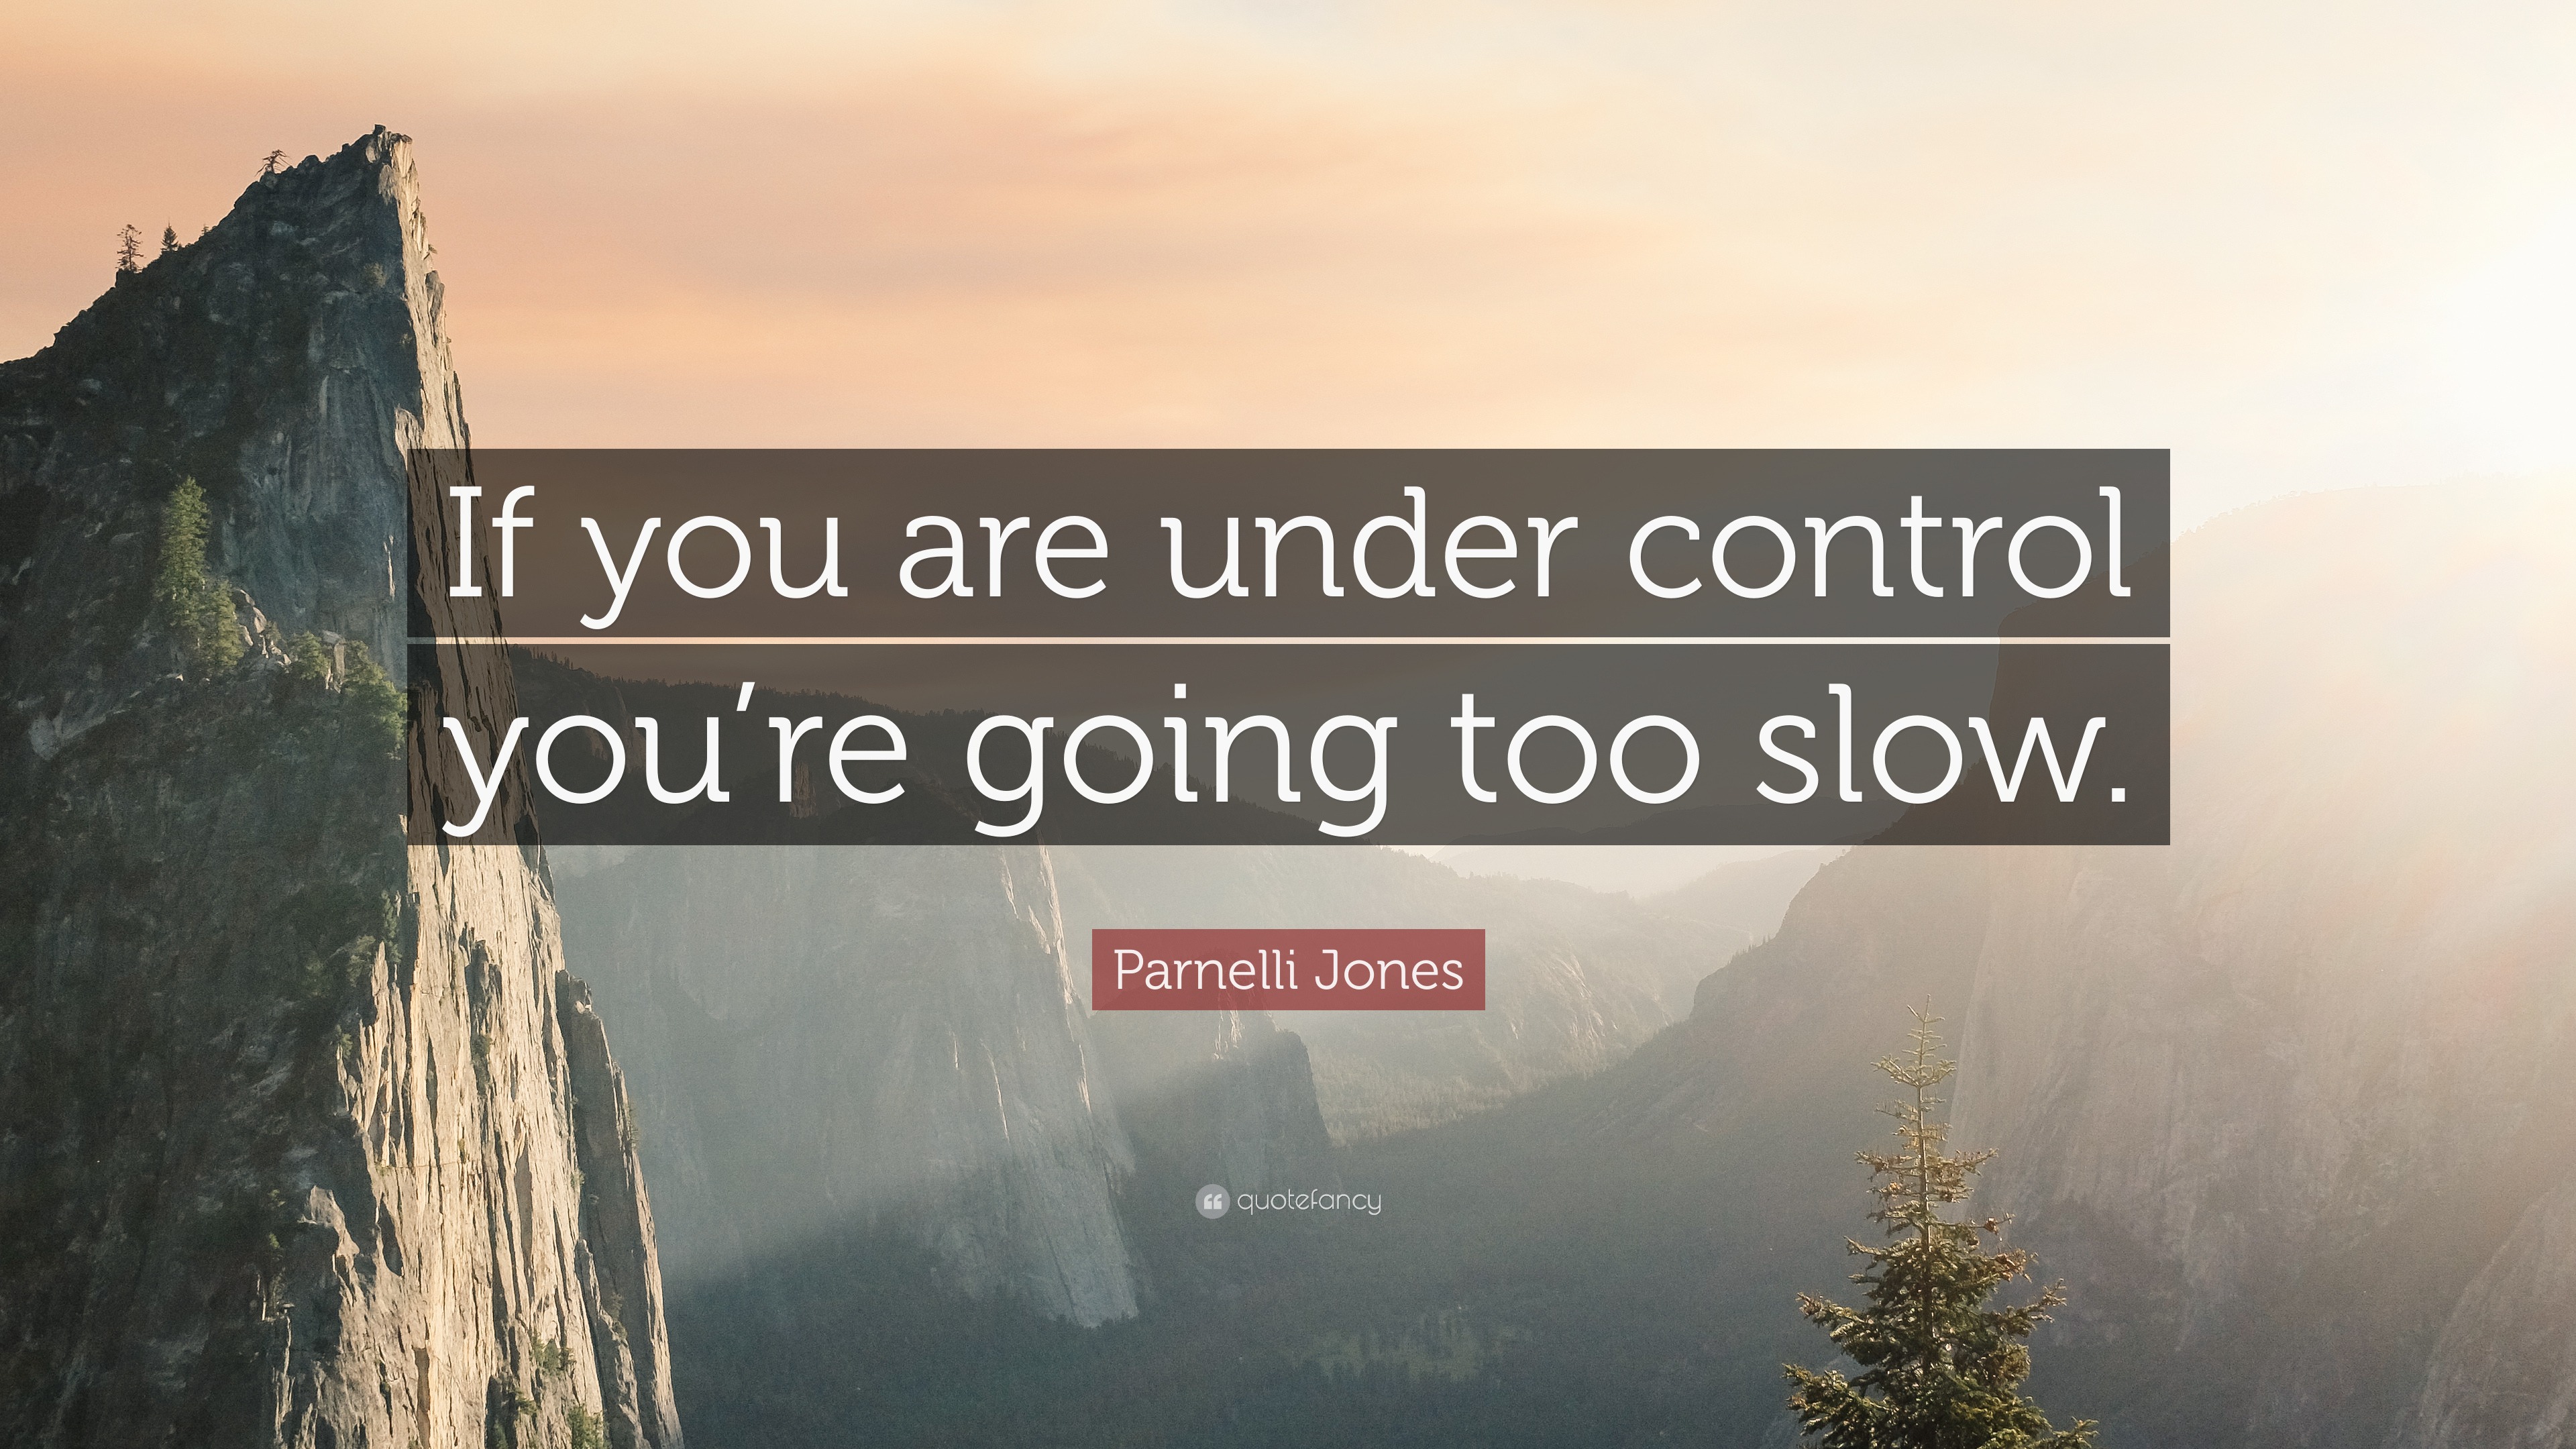 Parnelli Jones Quote “if You Are Under Control Youre Going Too Slow” 